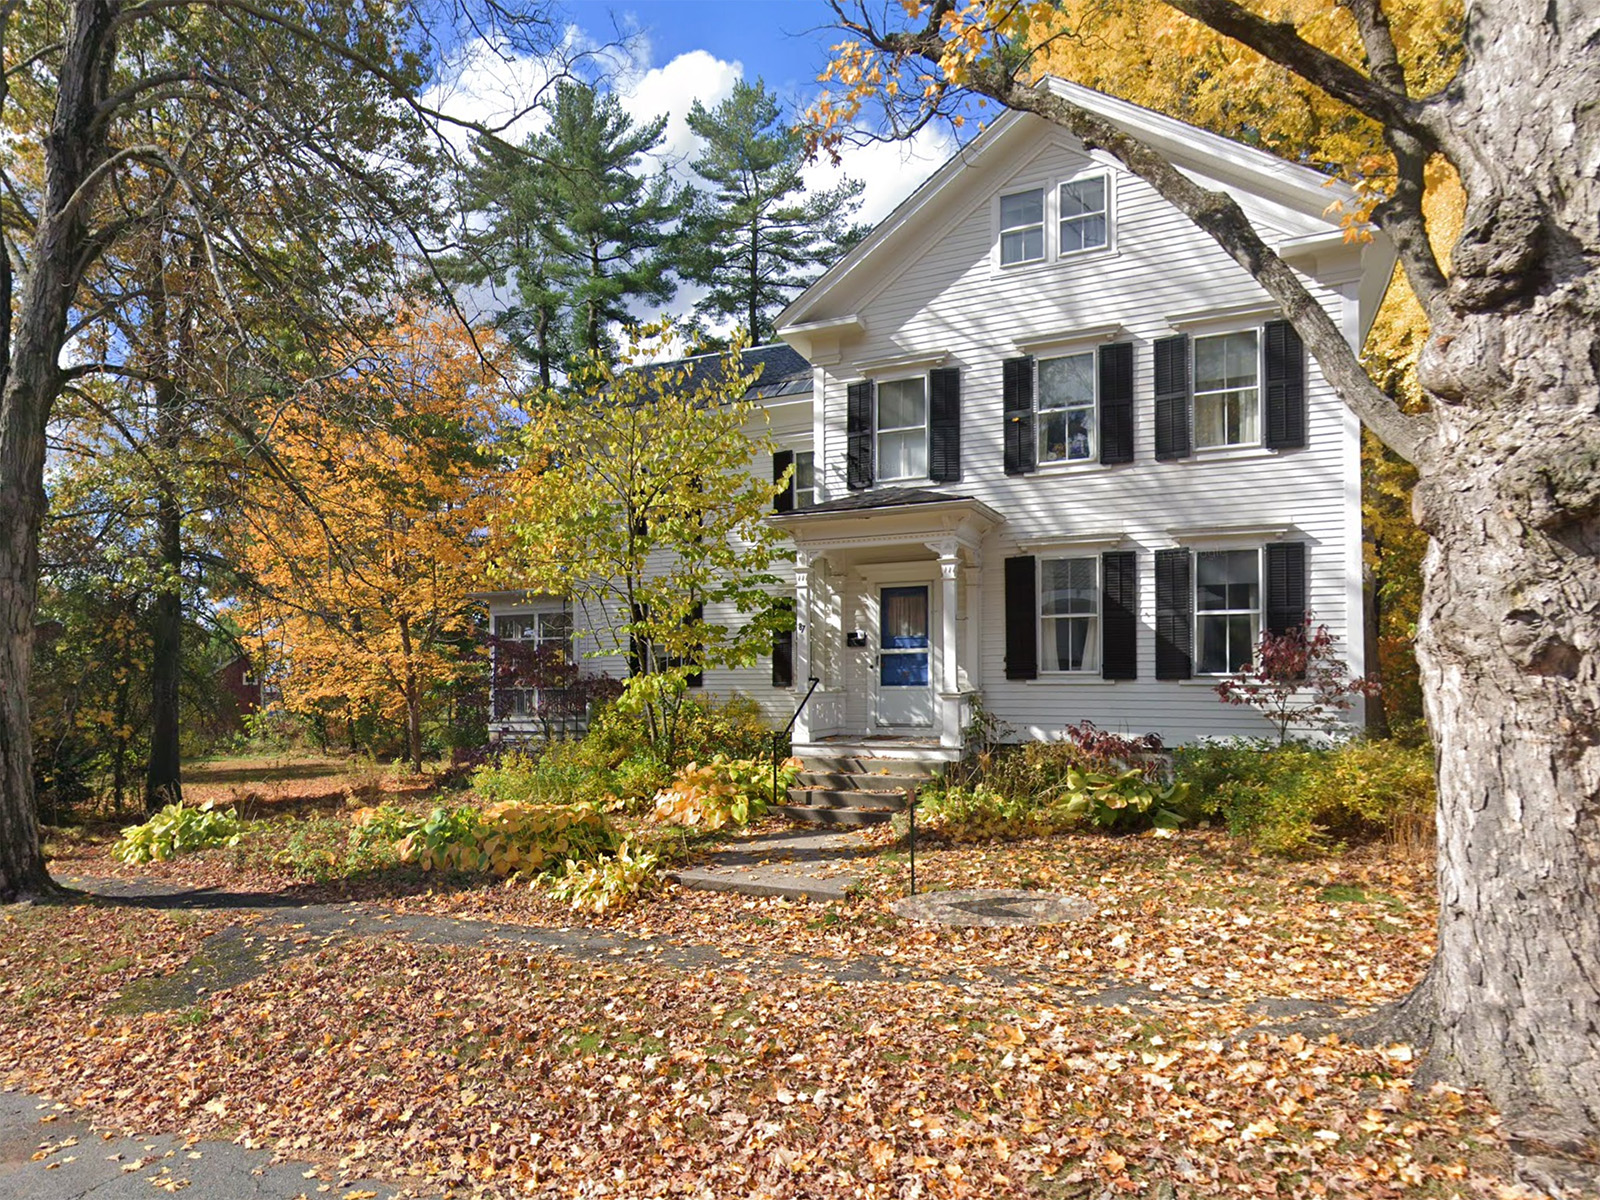 A two story white house surrounded by fall foliage